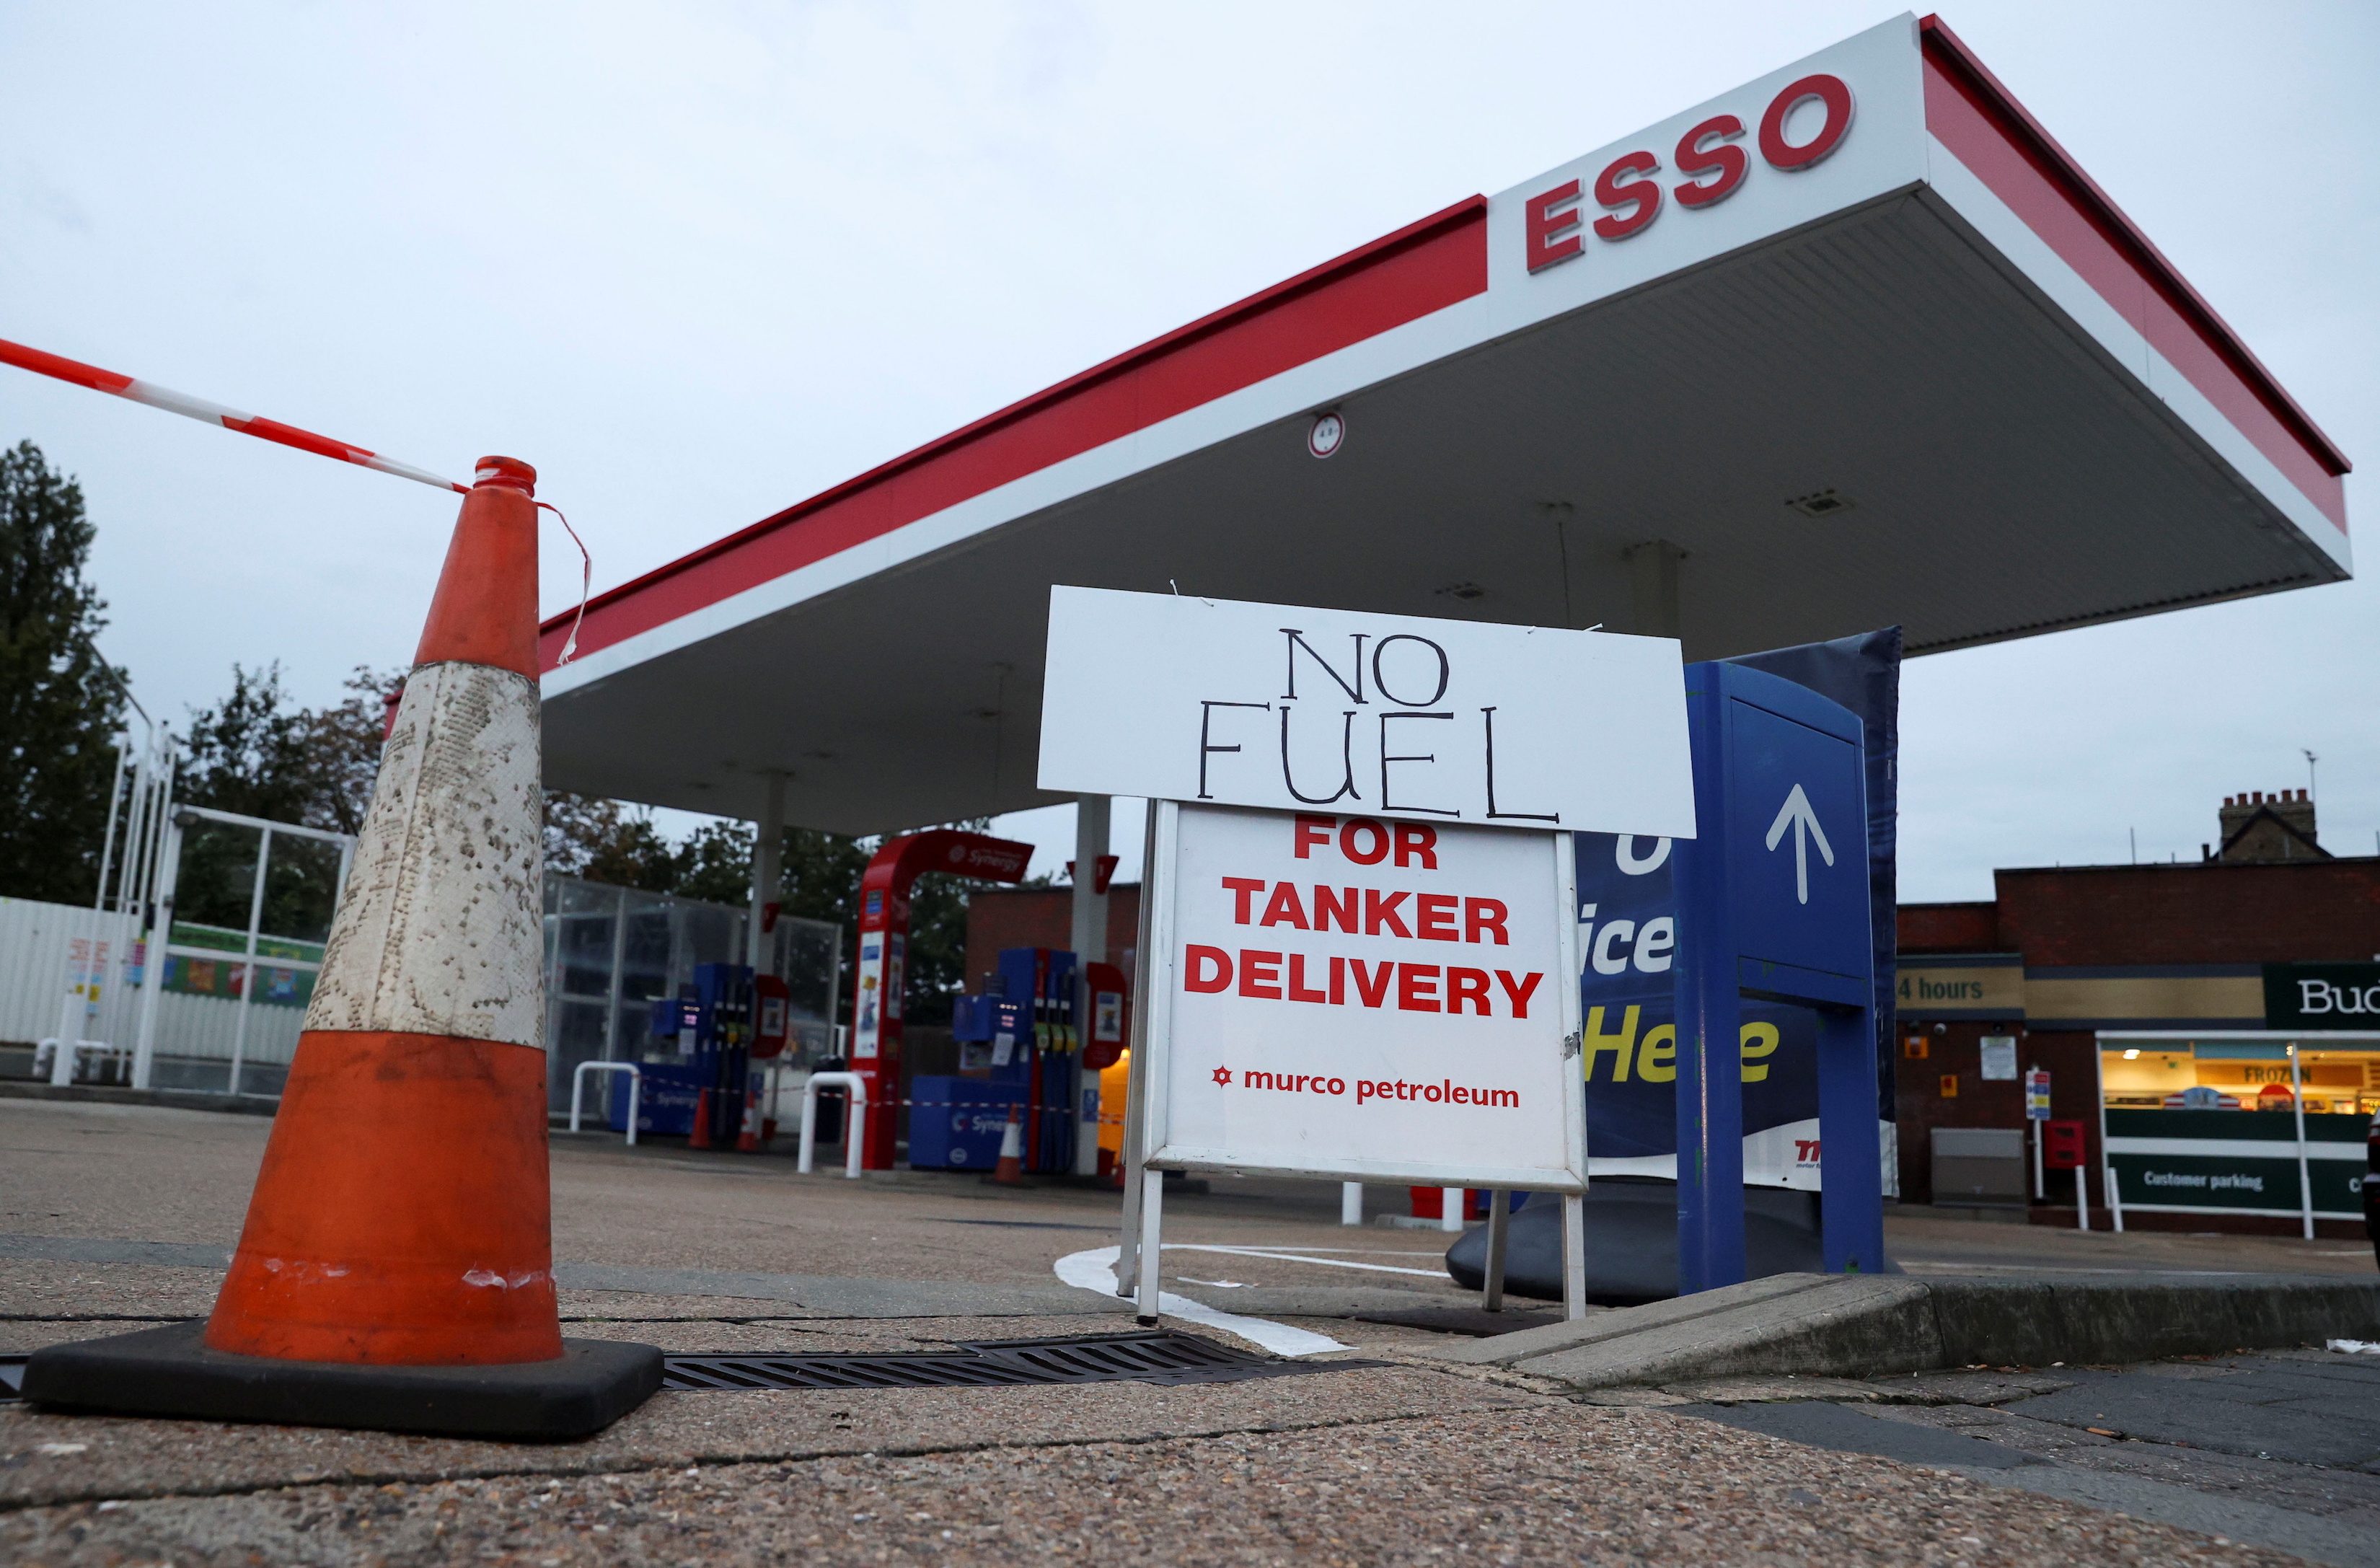 Chaos in the UK: Fuel pumps dry, medicines disrupted, and pig cull fears